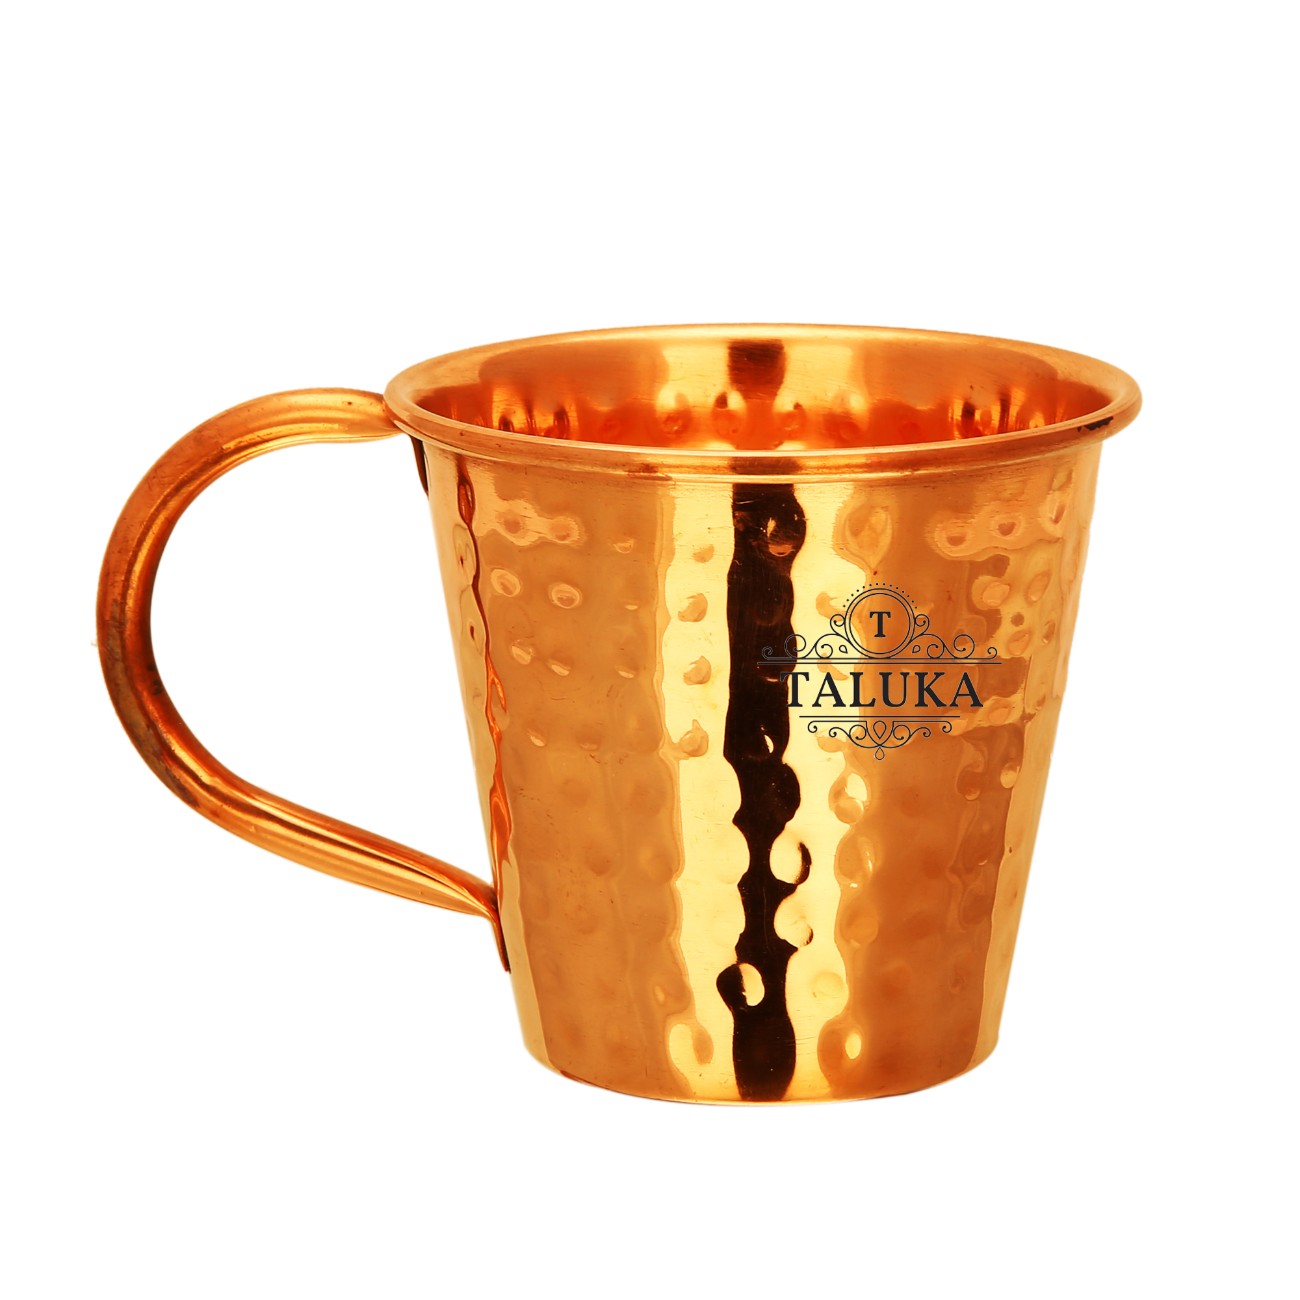 Copper Conical Design Moscow Mule Wine Beer Mug For Bar Ware Restaurant Home